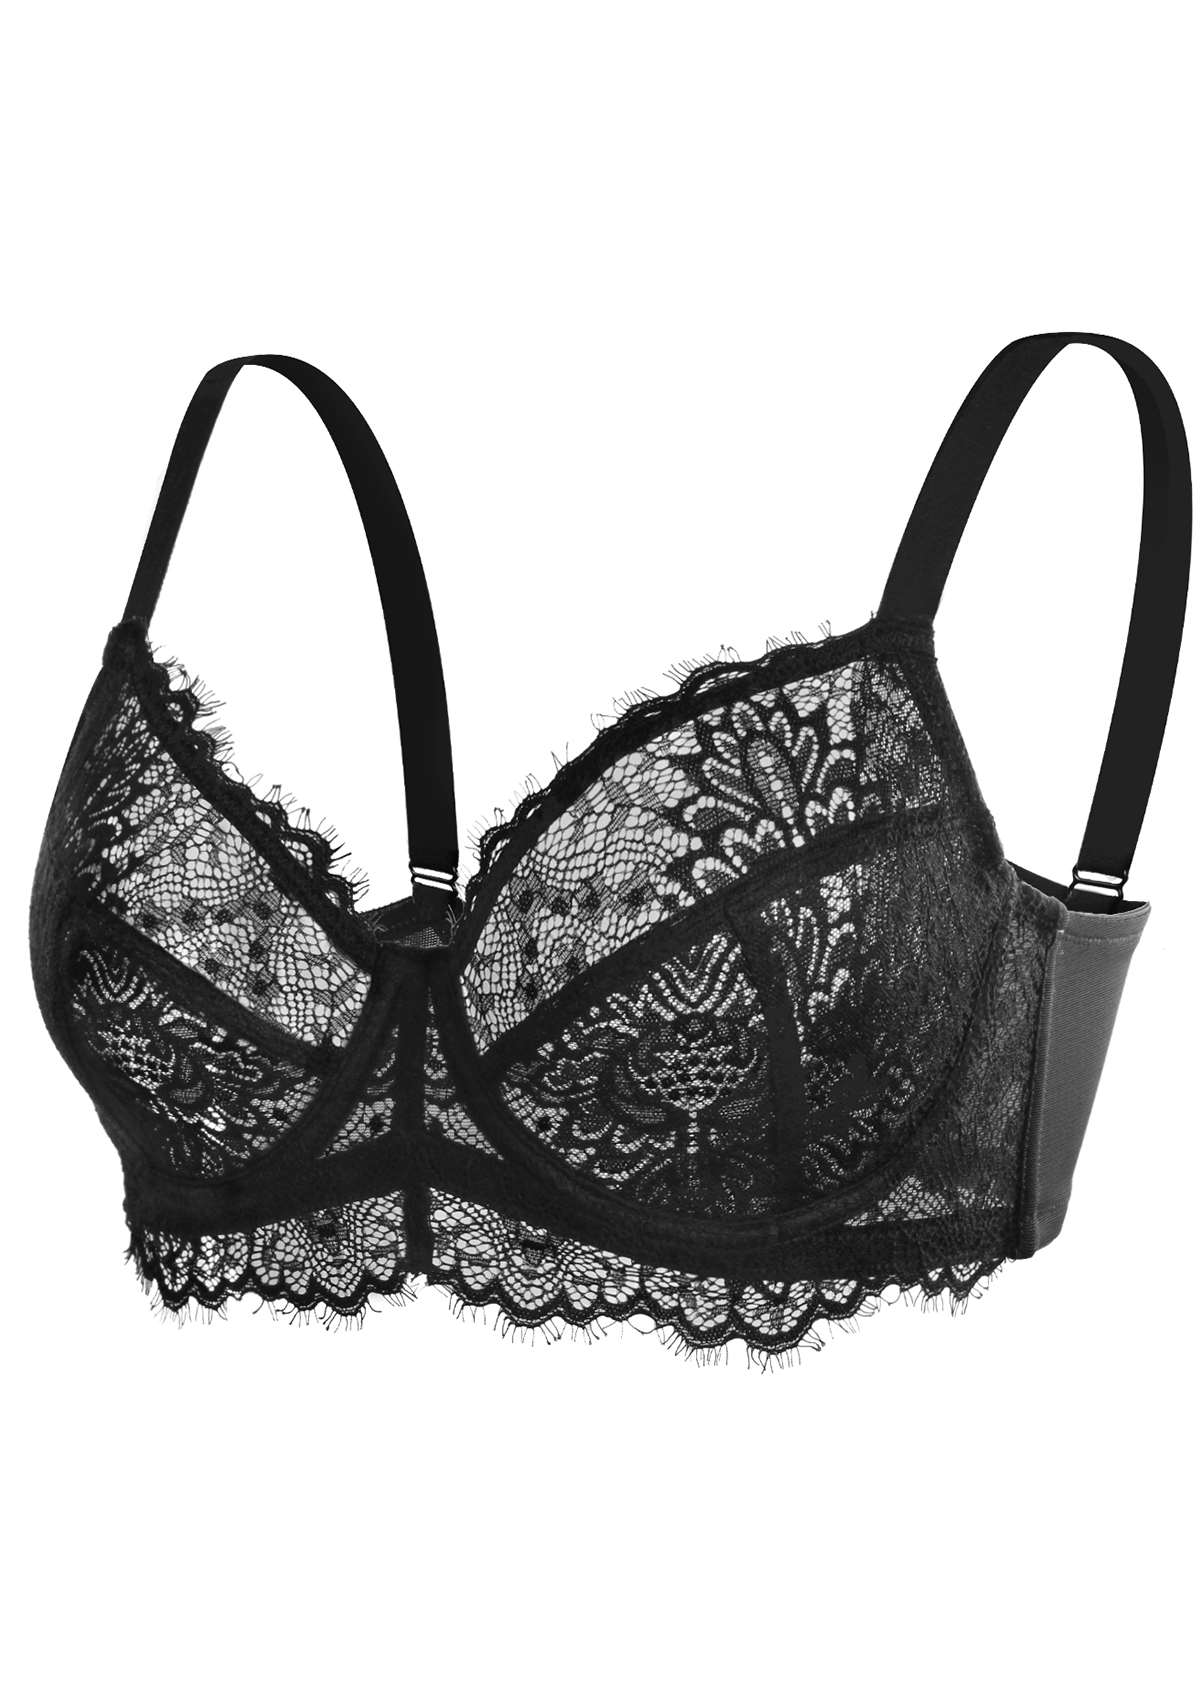 HSIA Sunflower Matching Bra And Underwear: Back And Side Smoothing Bra - Black / 32 / B